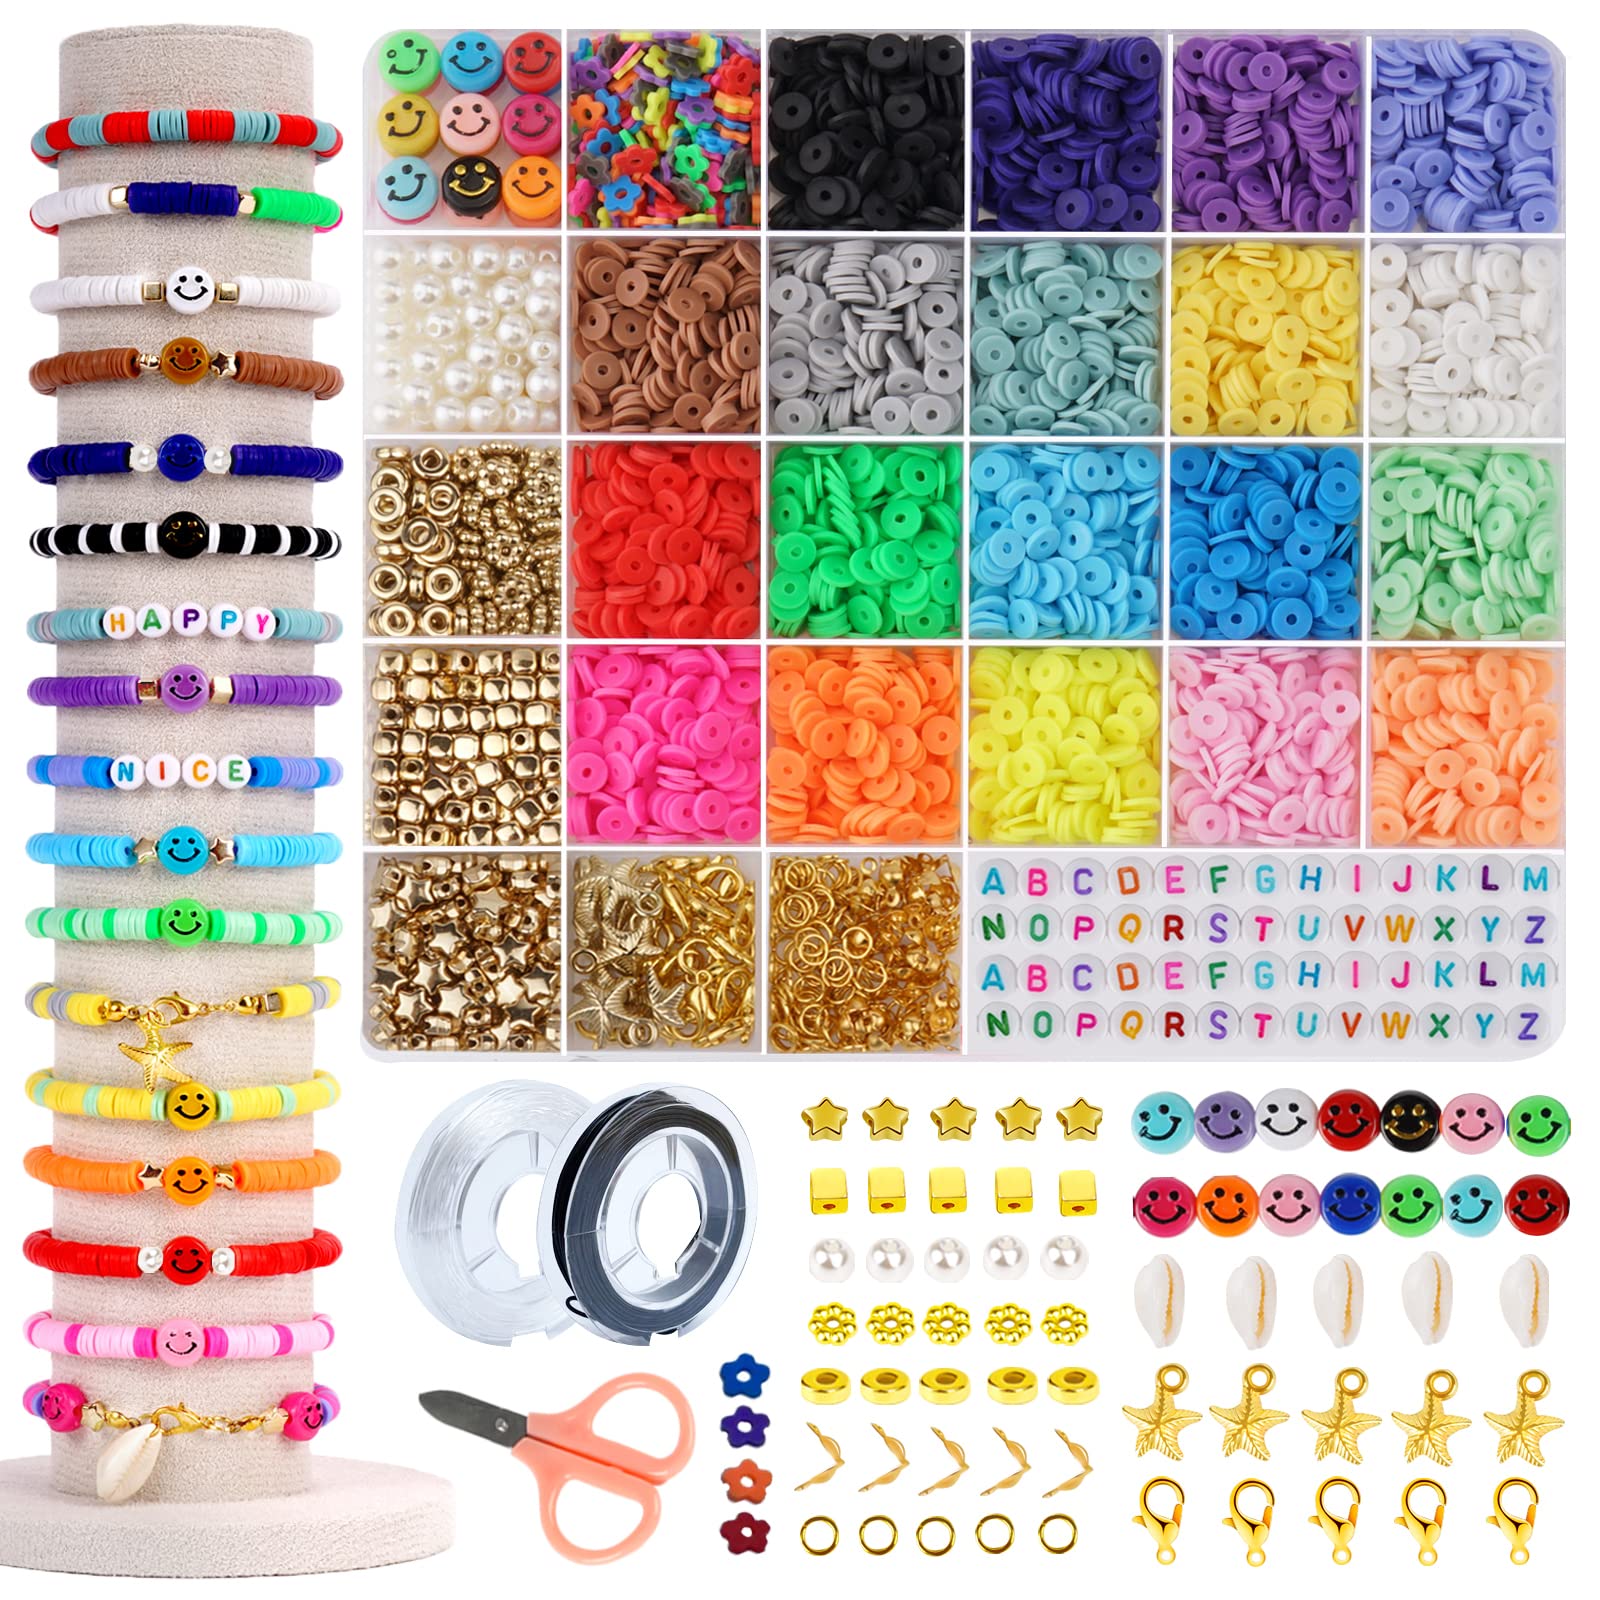 China Factory Handmade Polymer Clay Beads Strands, with Seed Beads